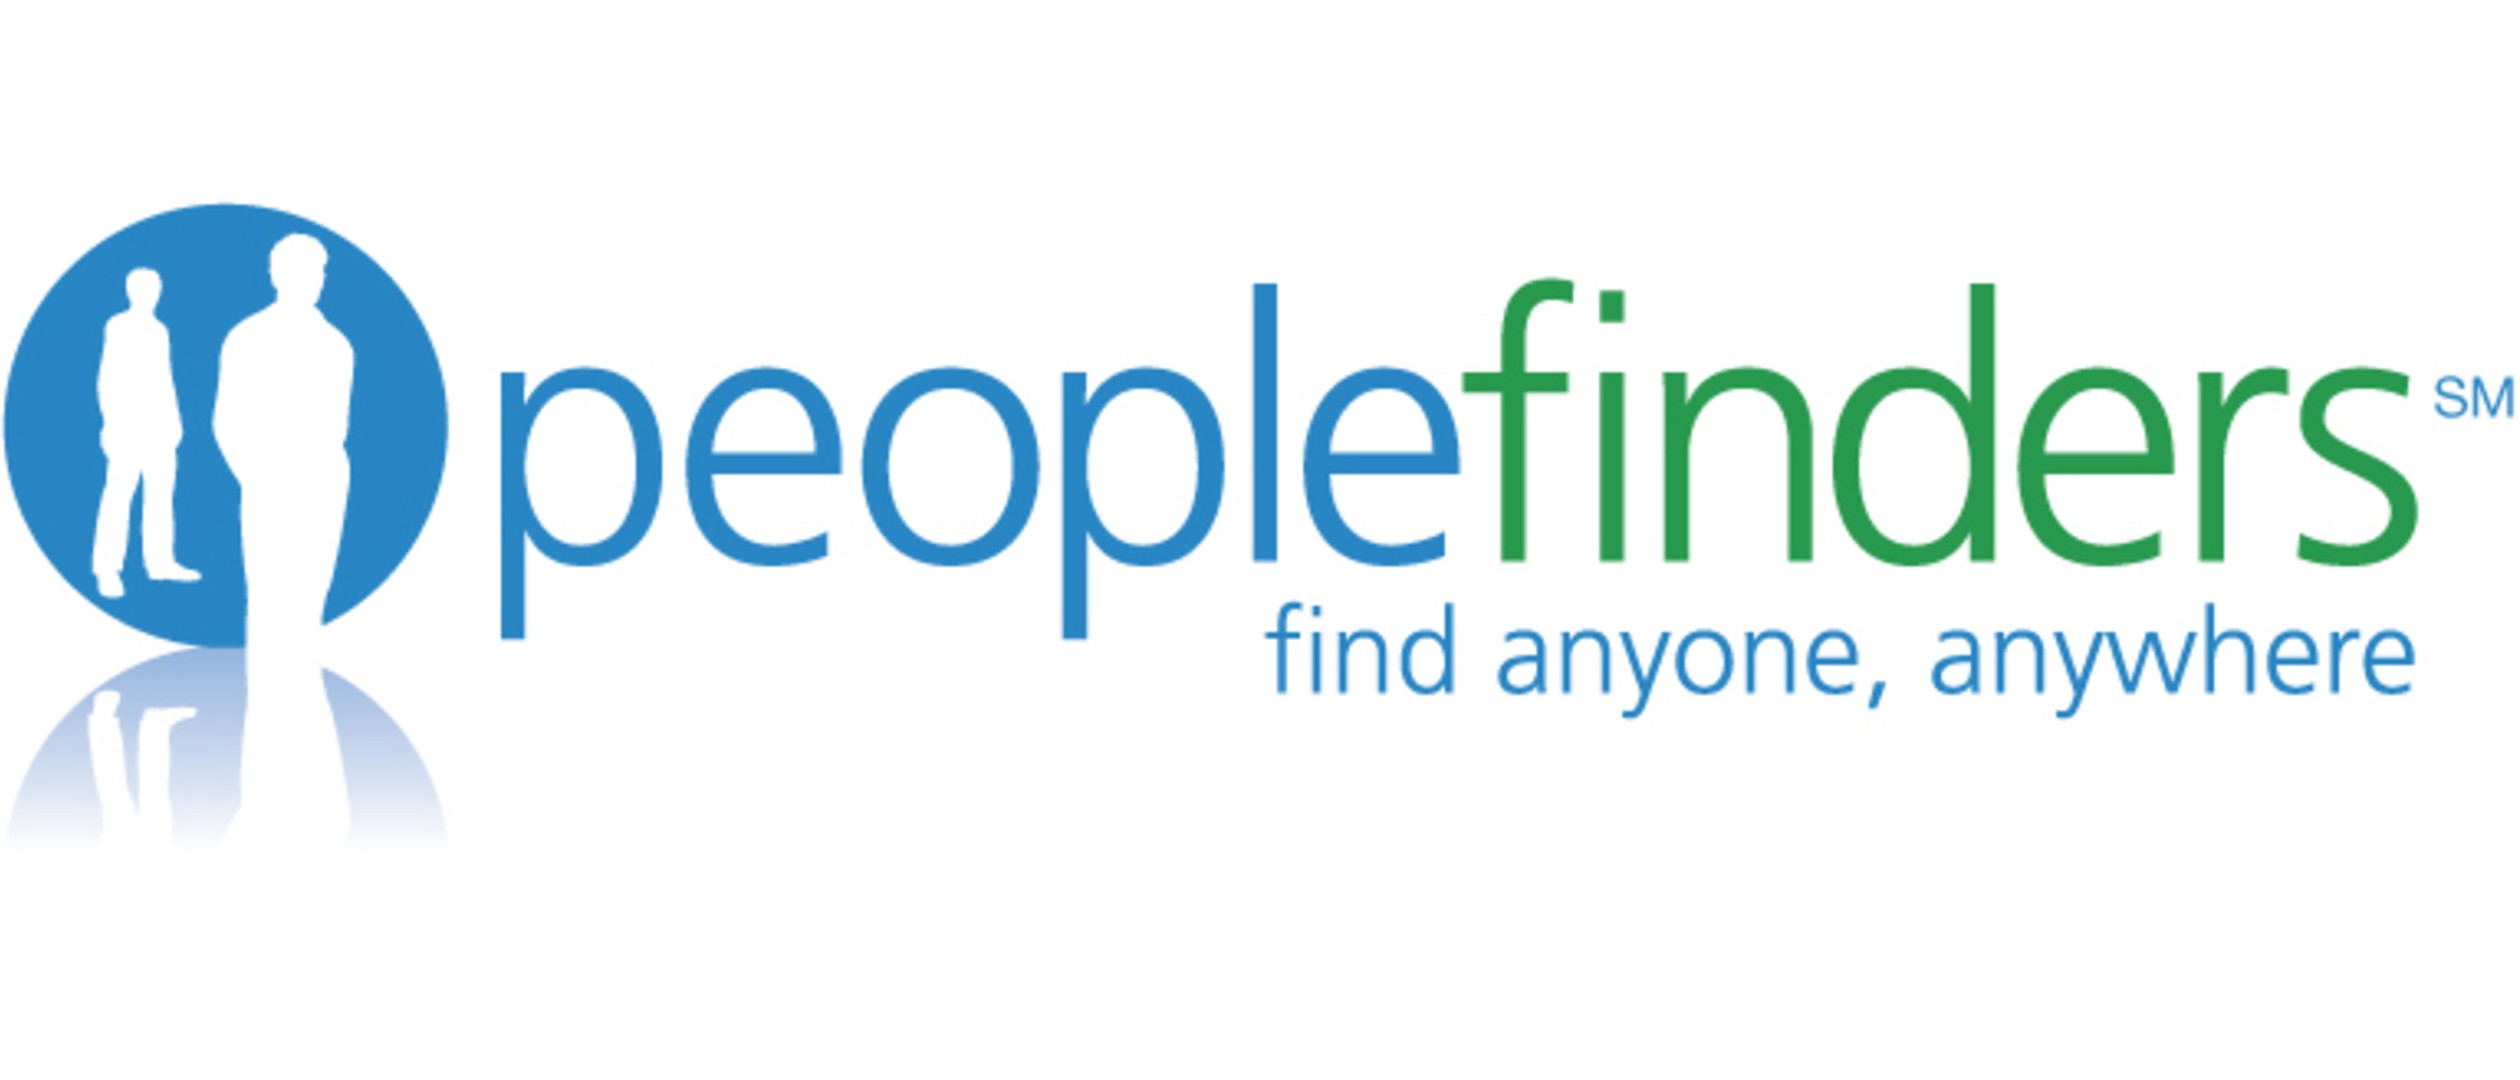 Best background check services: PeopleFinders